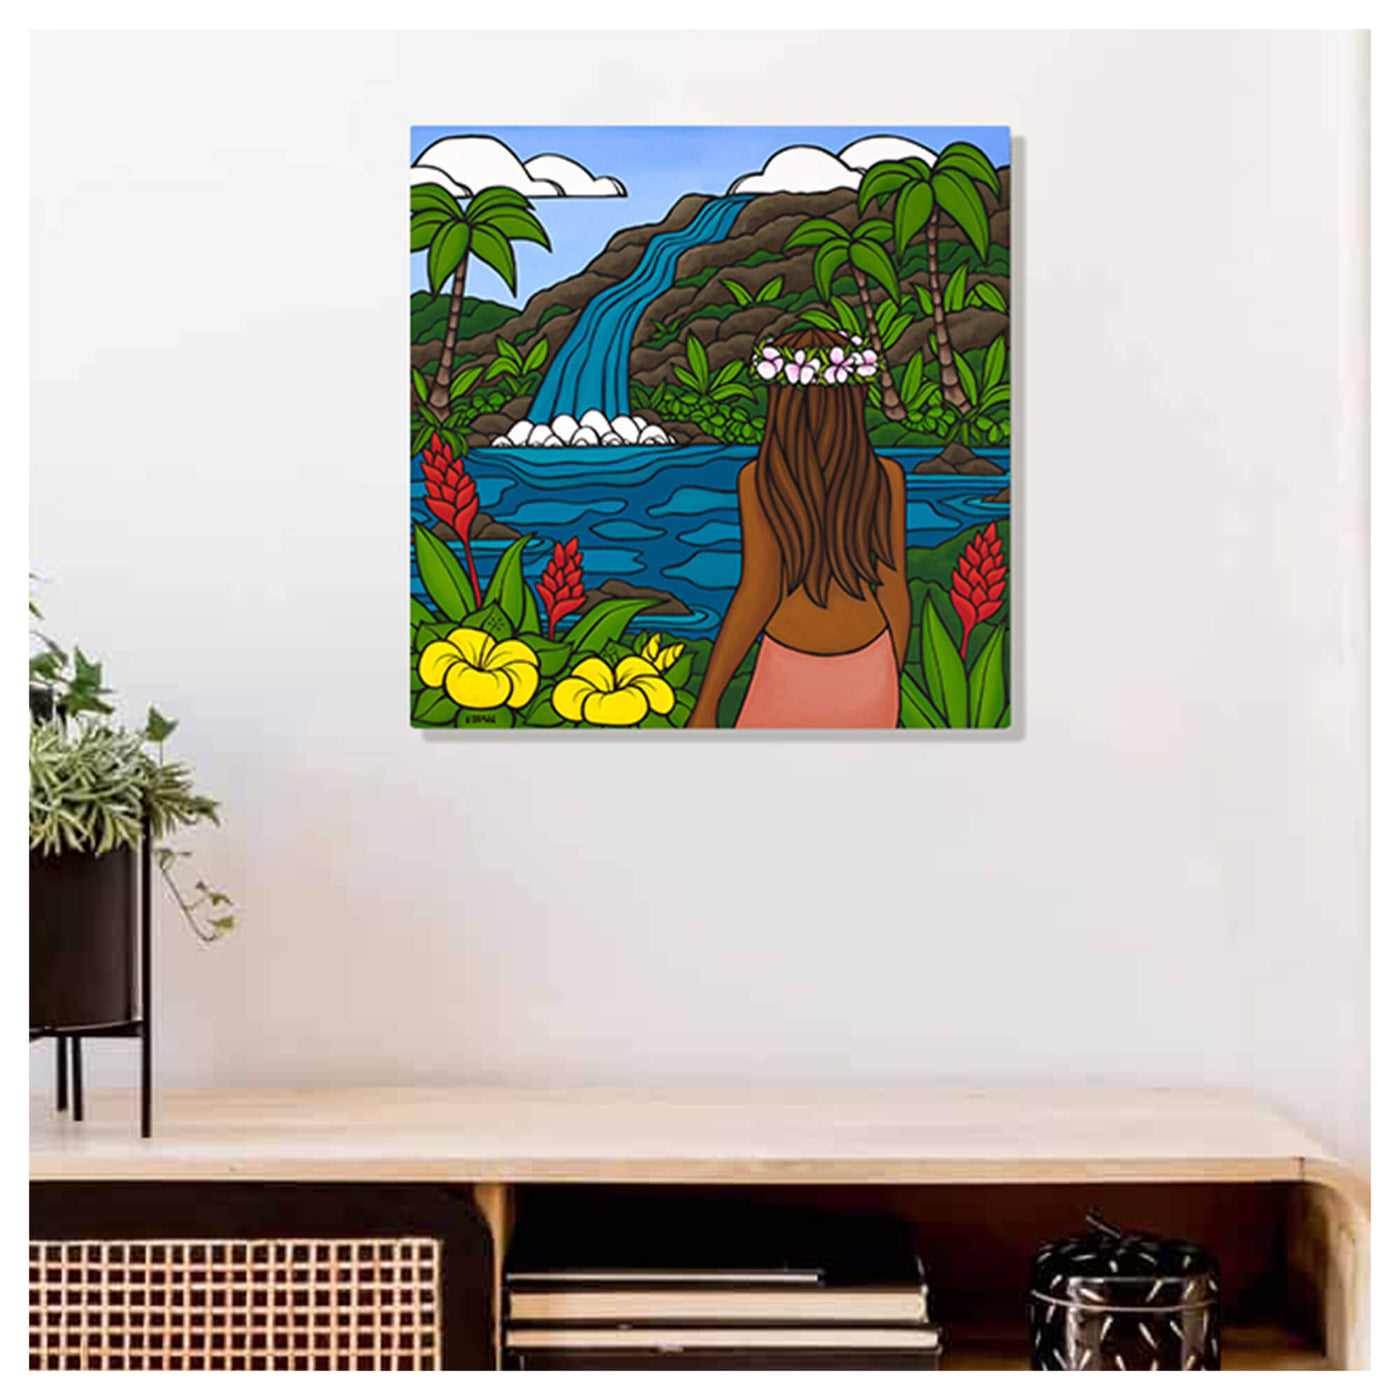 A metal art print of a local woman enjoying the waterfall view with colorful tropical flowers surrounding her by Hawaii surf artist Heather Brown